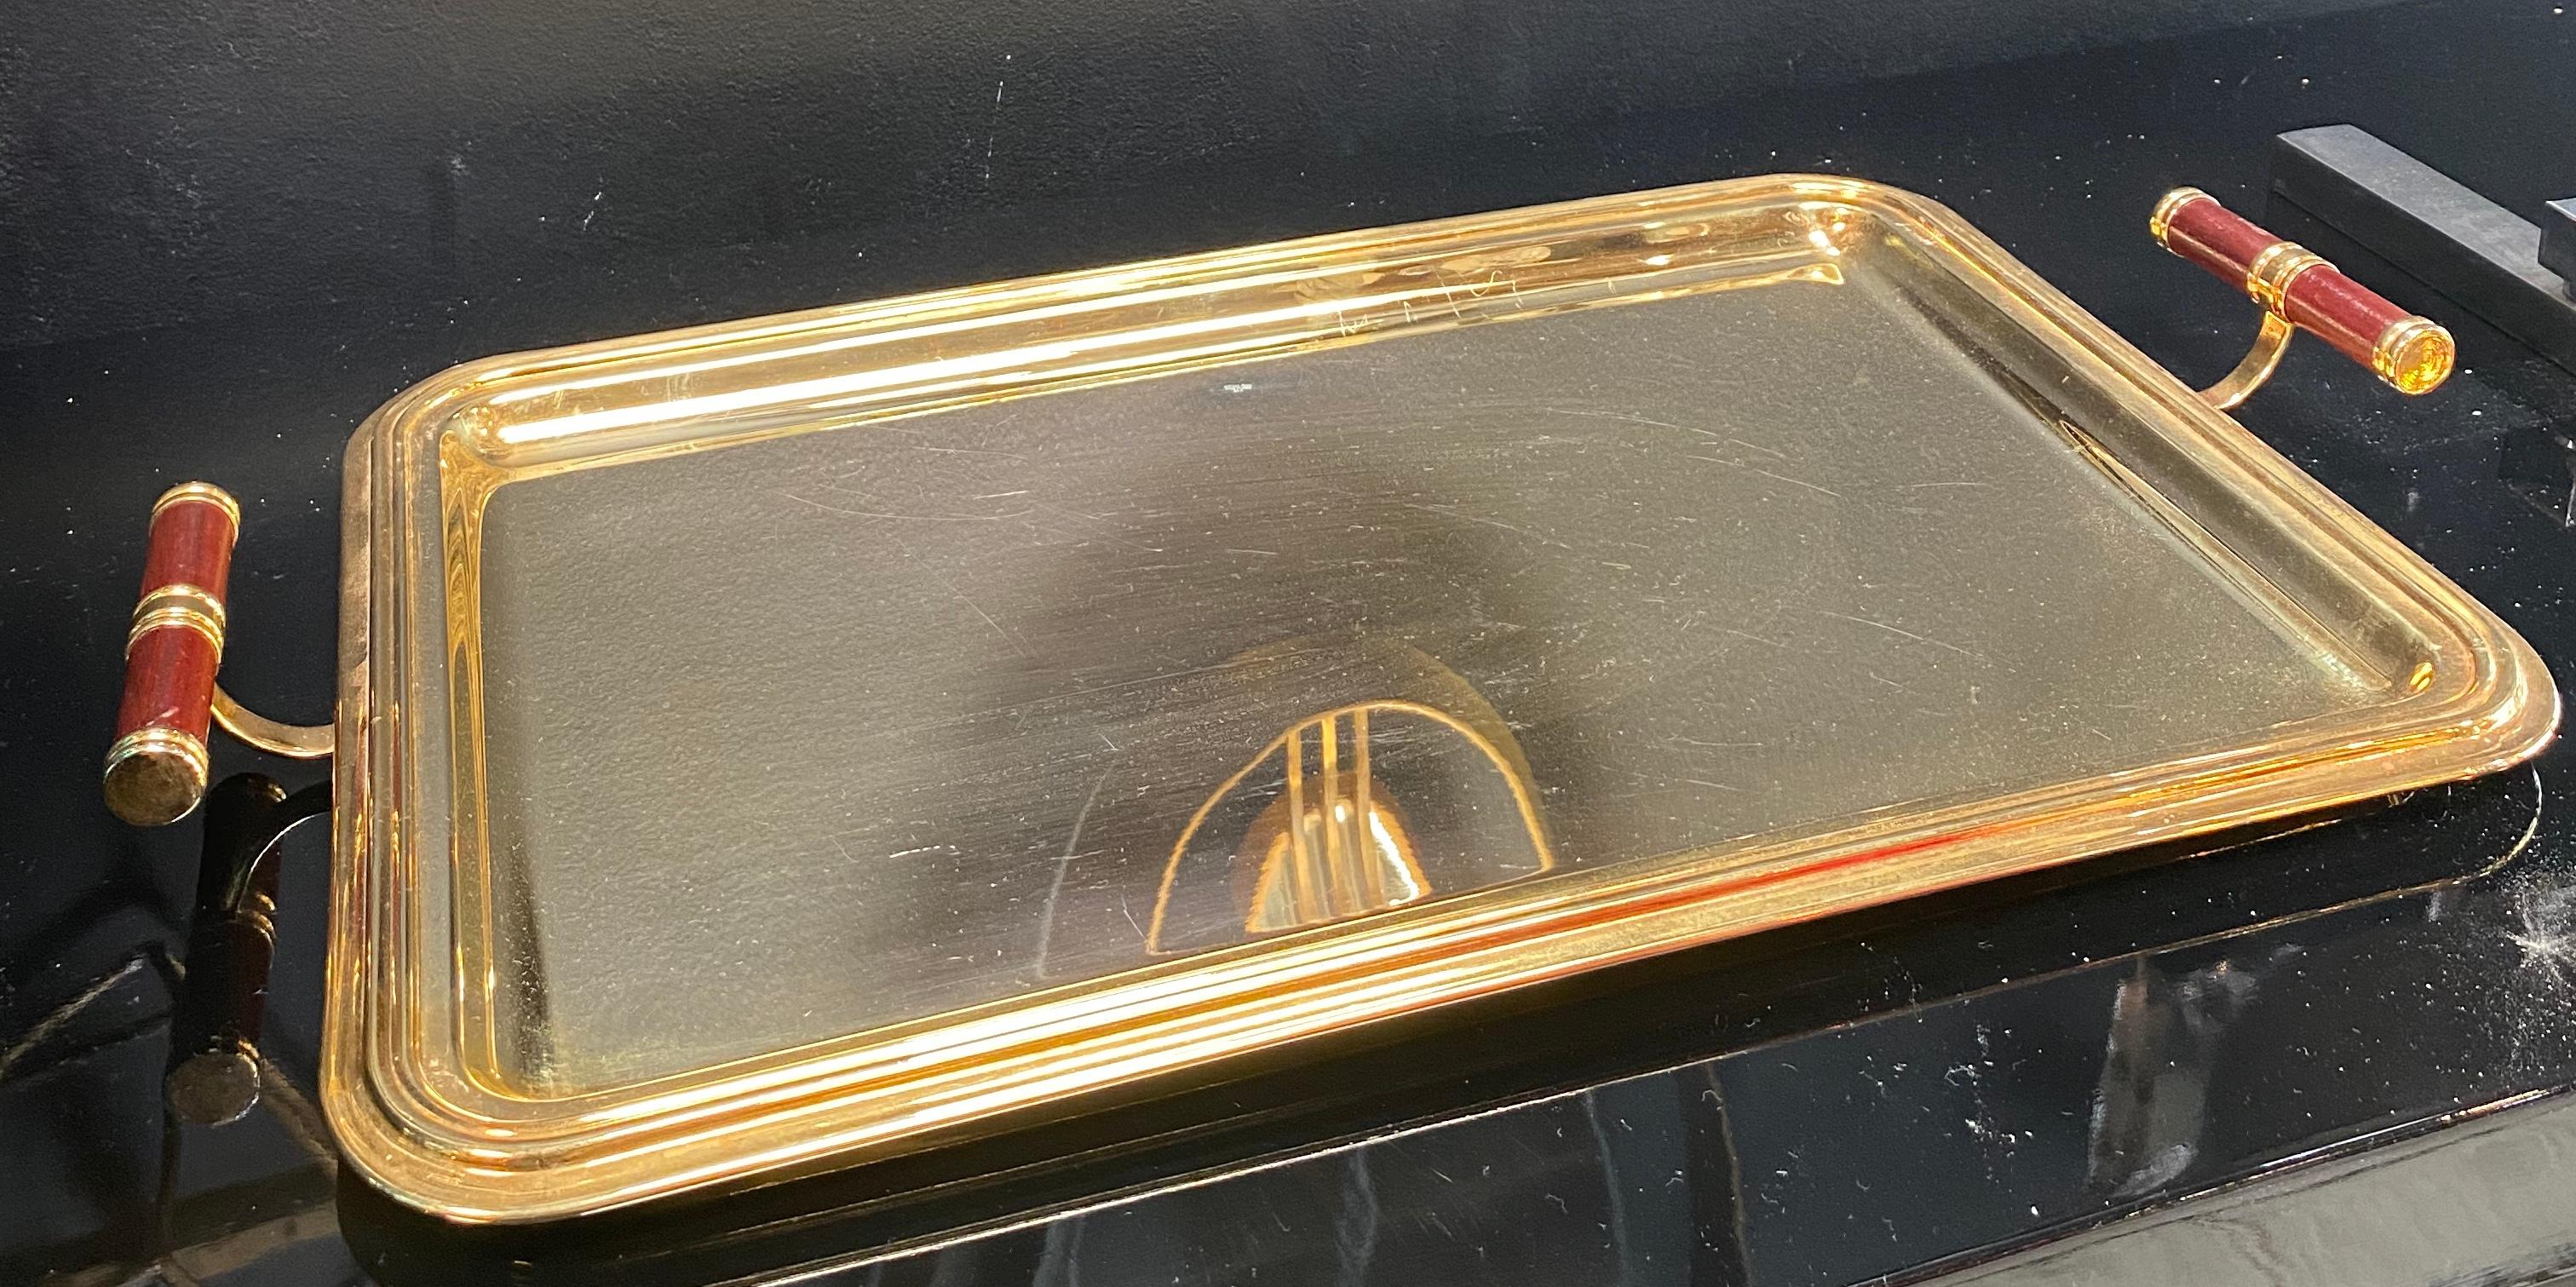 Large and beautiful 24-karat gold-plated tray with two beautiful wooden handles, the tray was produced in Italy in the 1970s in vintage condition the tray has some scratches but the beauty is truly unique and ready to give a touch to your